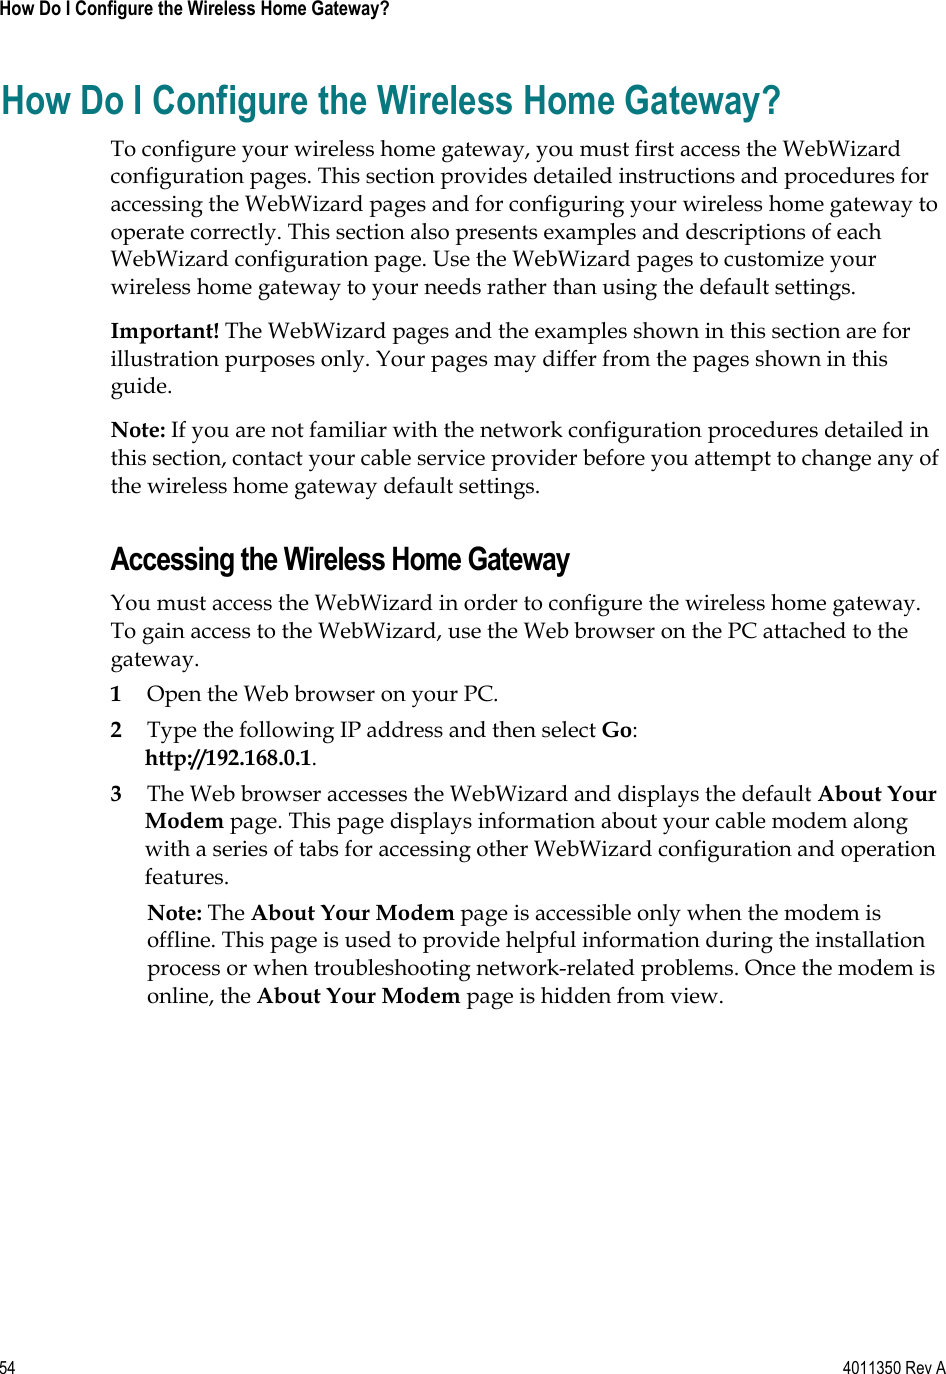 54    4011350 Rev A How Do I Configure the Wireless Home Gateway? How Do I Configure the Wireless Home Gateway? To configure your wireless home gateway, you must first access the WebWizard configuration pages. This section provides detailed instructions and procedures for accessing the WebWizard pages and for configuring your wireless home gateway to operate correctly. This section also presents examples and descriptions of each WebWizard configuration page. Use the WebWizard pages to customize your wireless home gateway to your needs rather than using the default settings. Important! The WebWizard pages and the examples shown in this section are for illustration purposes only. Your pages may differ from the pages shown in this guide.Note: If you are not familiar with the network configuration procedures detailed in this section, contact your cable service provider before you attempt to change any of the wireless home gateway default settings. Accessing the Wireless Home Gateway You must access the WebWizard in order to configure the wireless home gateway. To gain access to the WebWizard, use the Web browser on the PC attached to the gateway.  1Open the Web browser on your PC. 2Type the following IP address and then select Go:http://192.168.0.1.3The Web browser accesses the WebWizard and displays the default About Your Modem page. This page displays information about your cable modem along with a series of tabs for accessing other WebWizard configuration and operation features.Note: The About Your Modem page is accessible only when the modem is offline. This page is used to provide helpful information during the installation process or when troubleshooting network-related problems. Once the modem is online, the About Your Modem page is hidden from view. 